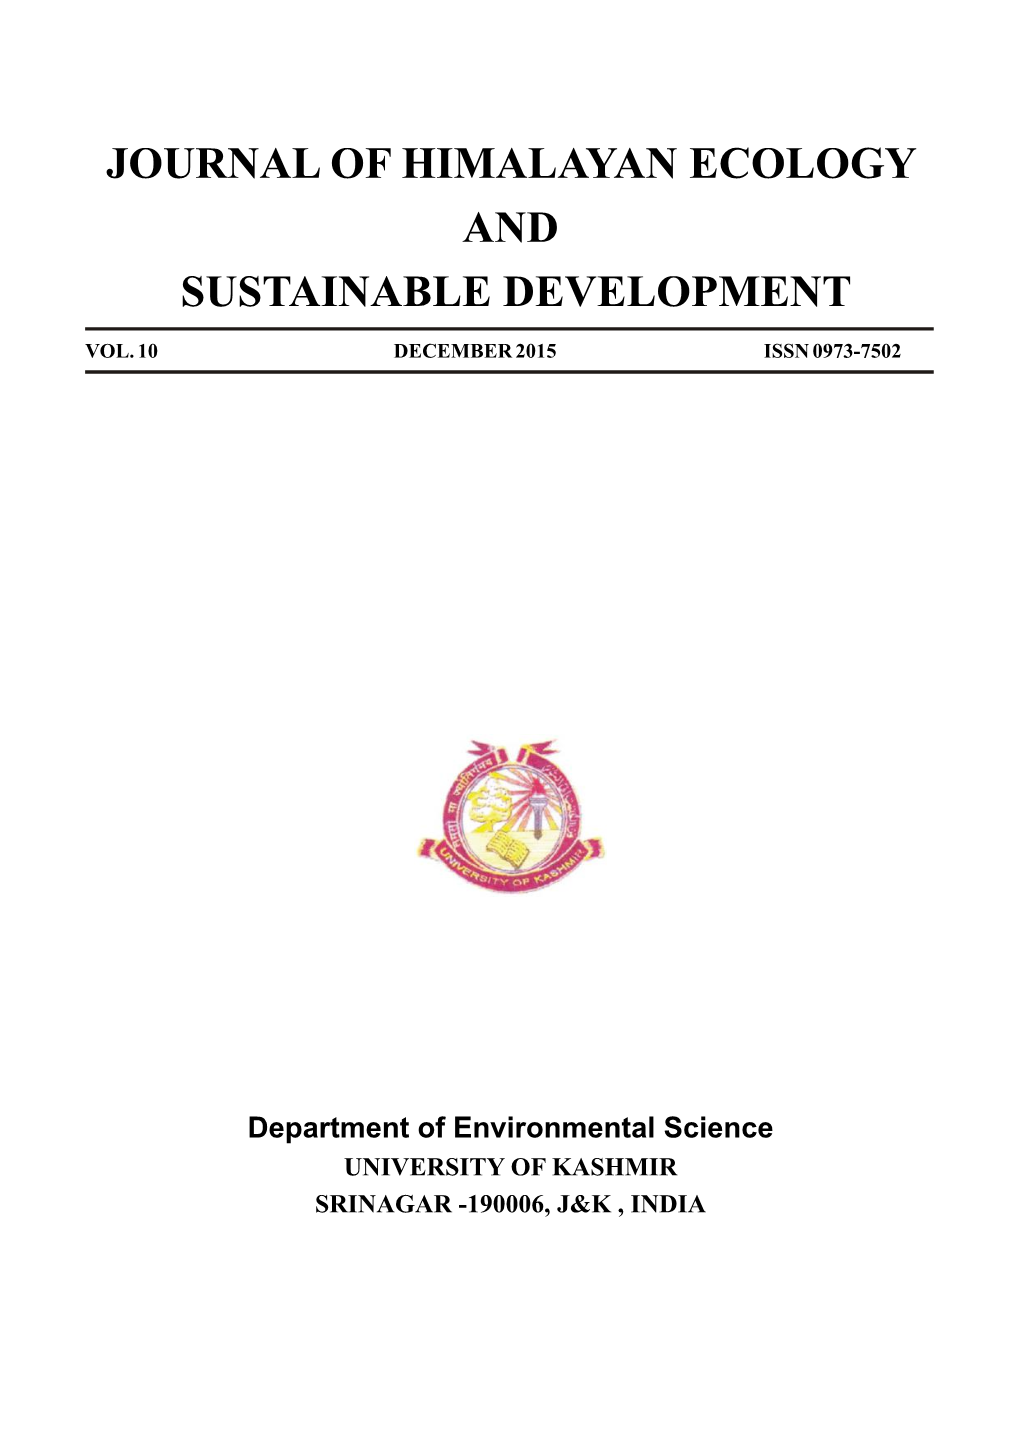 Journal of Himalayan Ecology and Sustainable Development